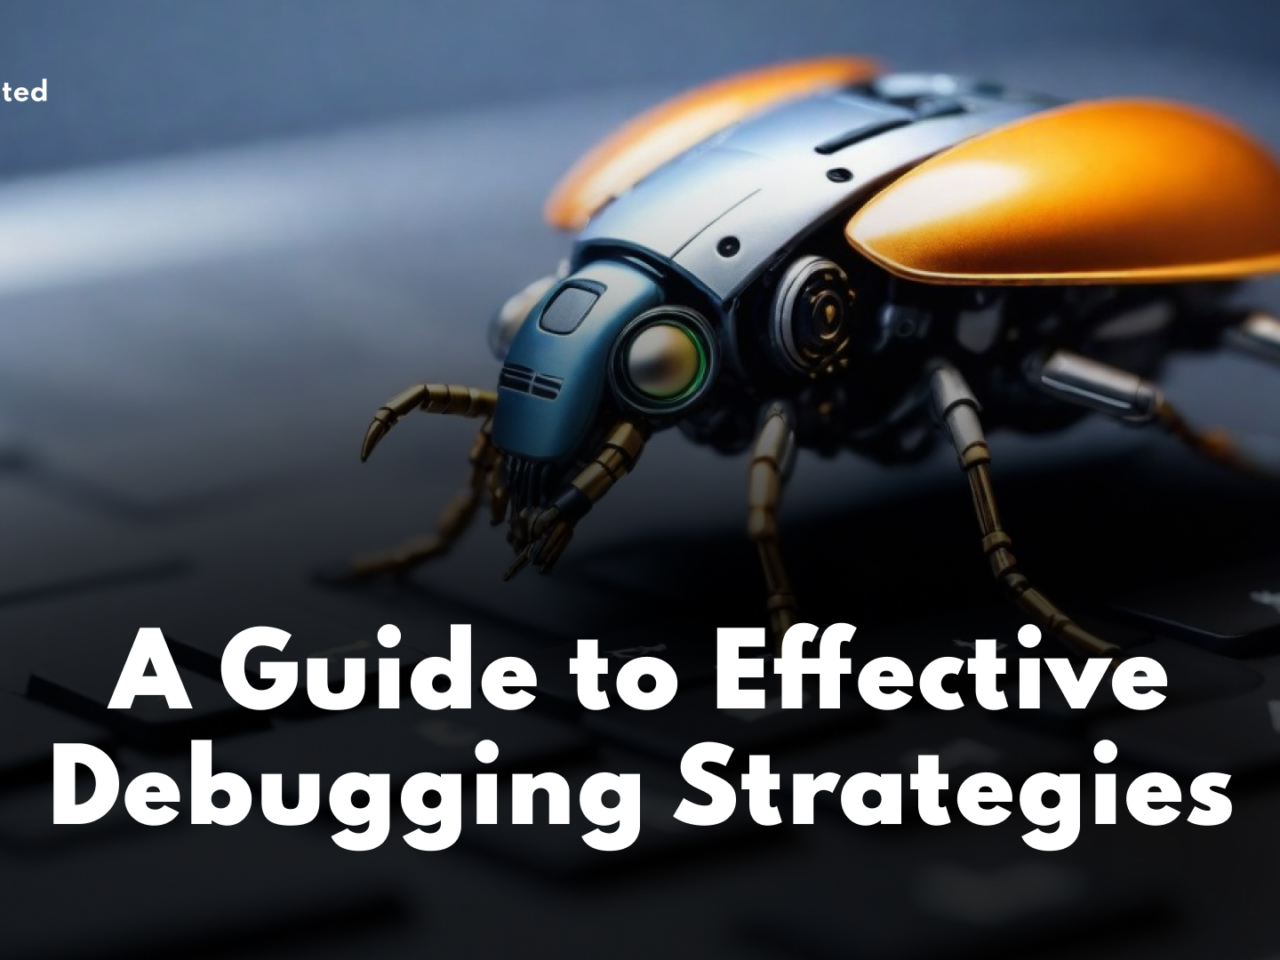 A Guide to Effective Debugging Strategies